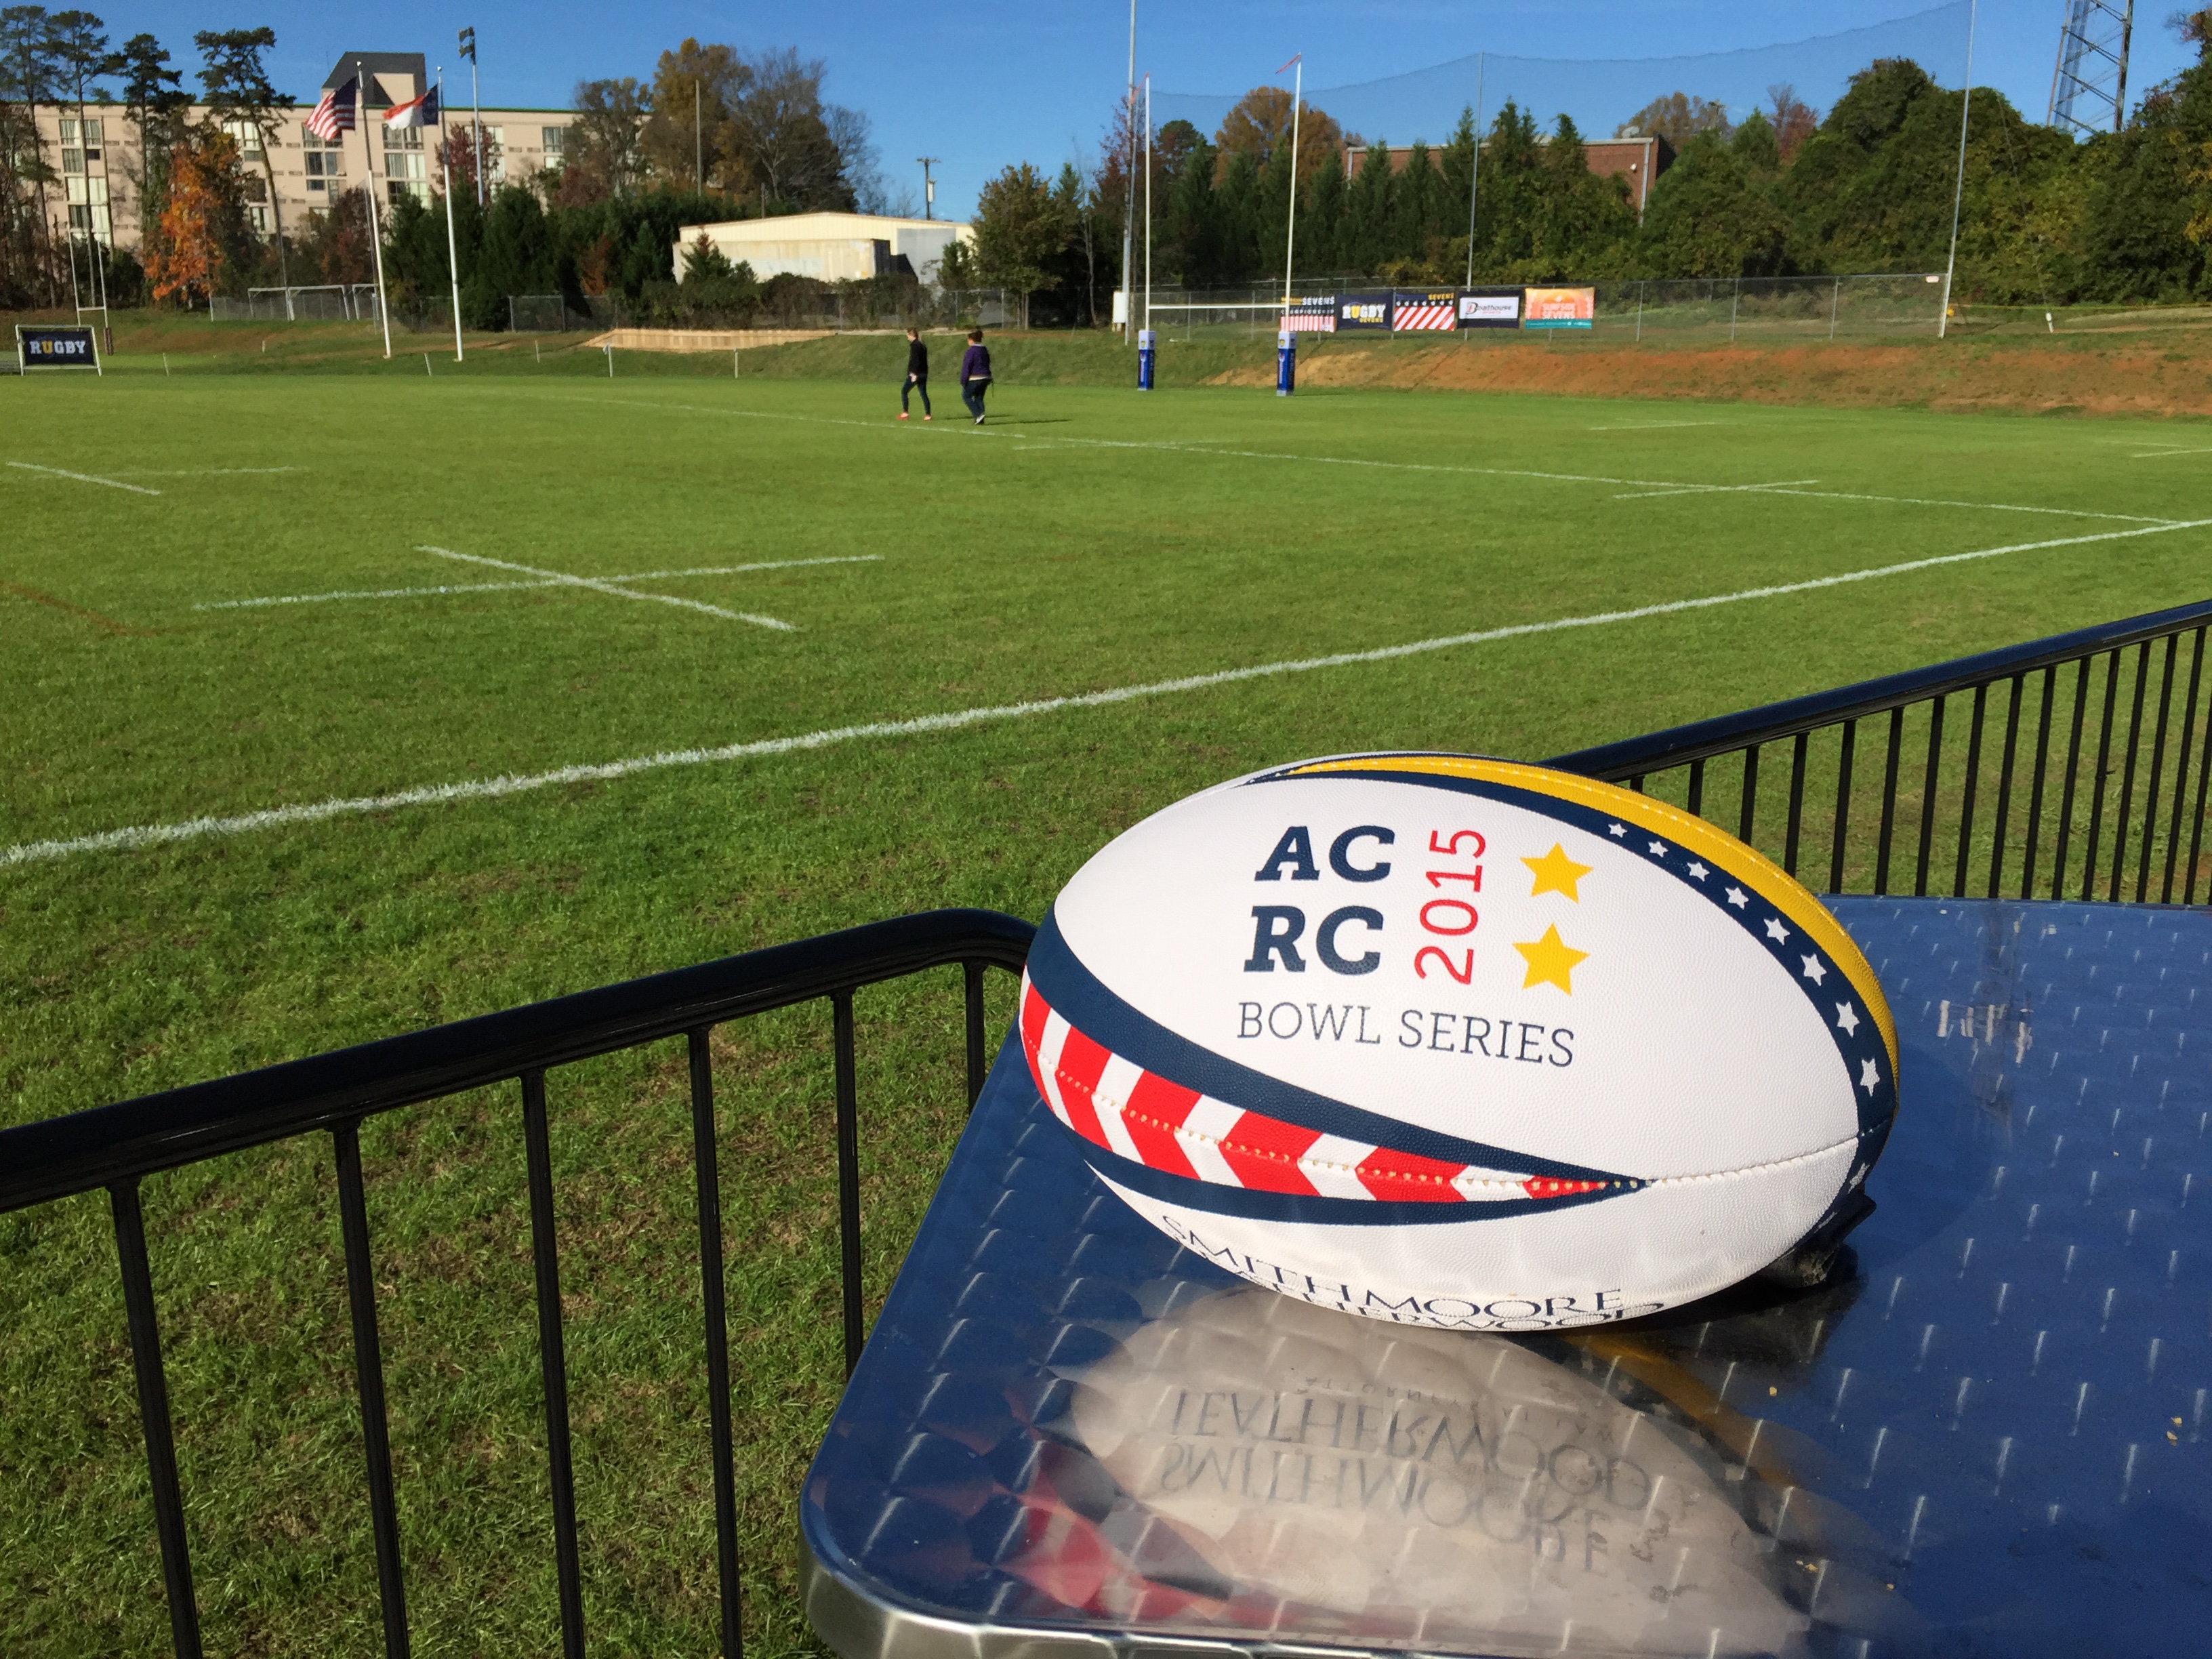 URugby and the ACRCBowlSeries